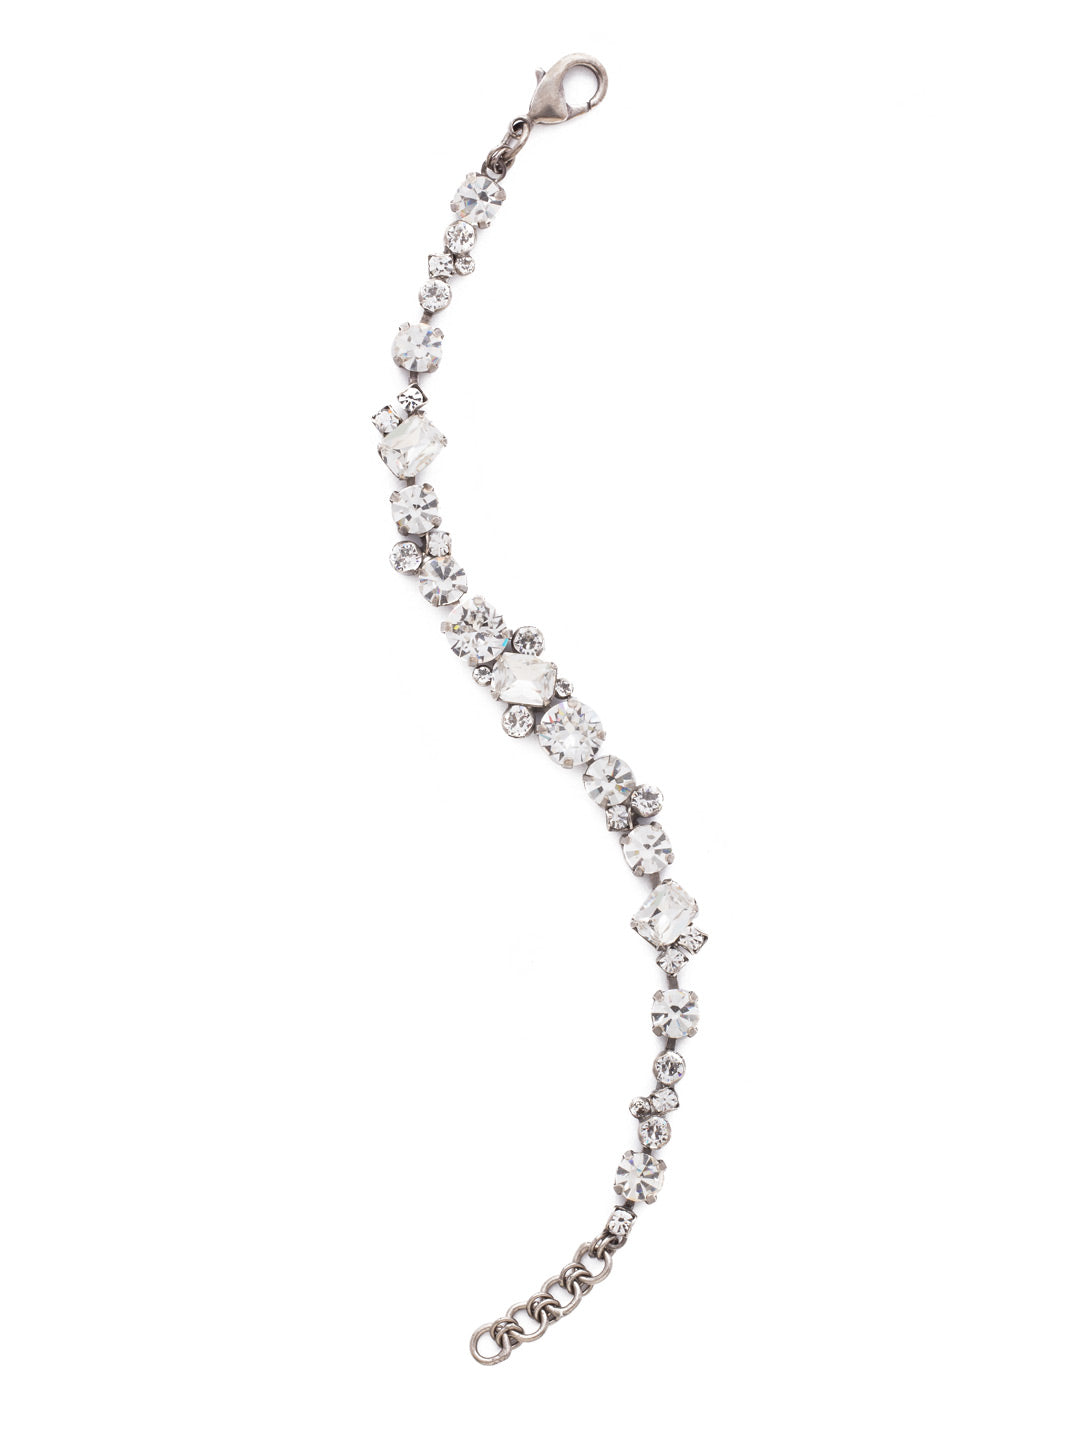 Geo Classic Tennis Bracelet - BDG46ASCRY - <p>Delicate round crystals mix with emerald cut crystals for a classic and elegant look. From Sorrelli's Crystal collection in our Antique Silver-tone finish.</p>